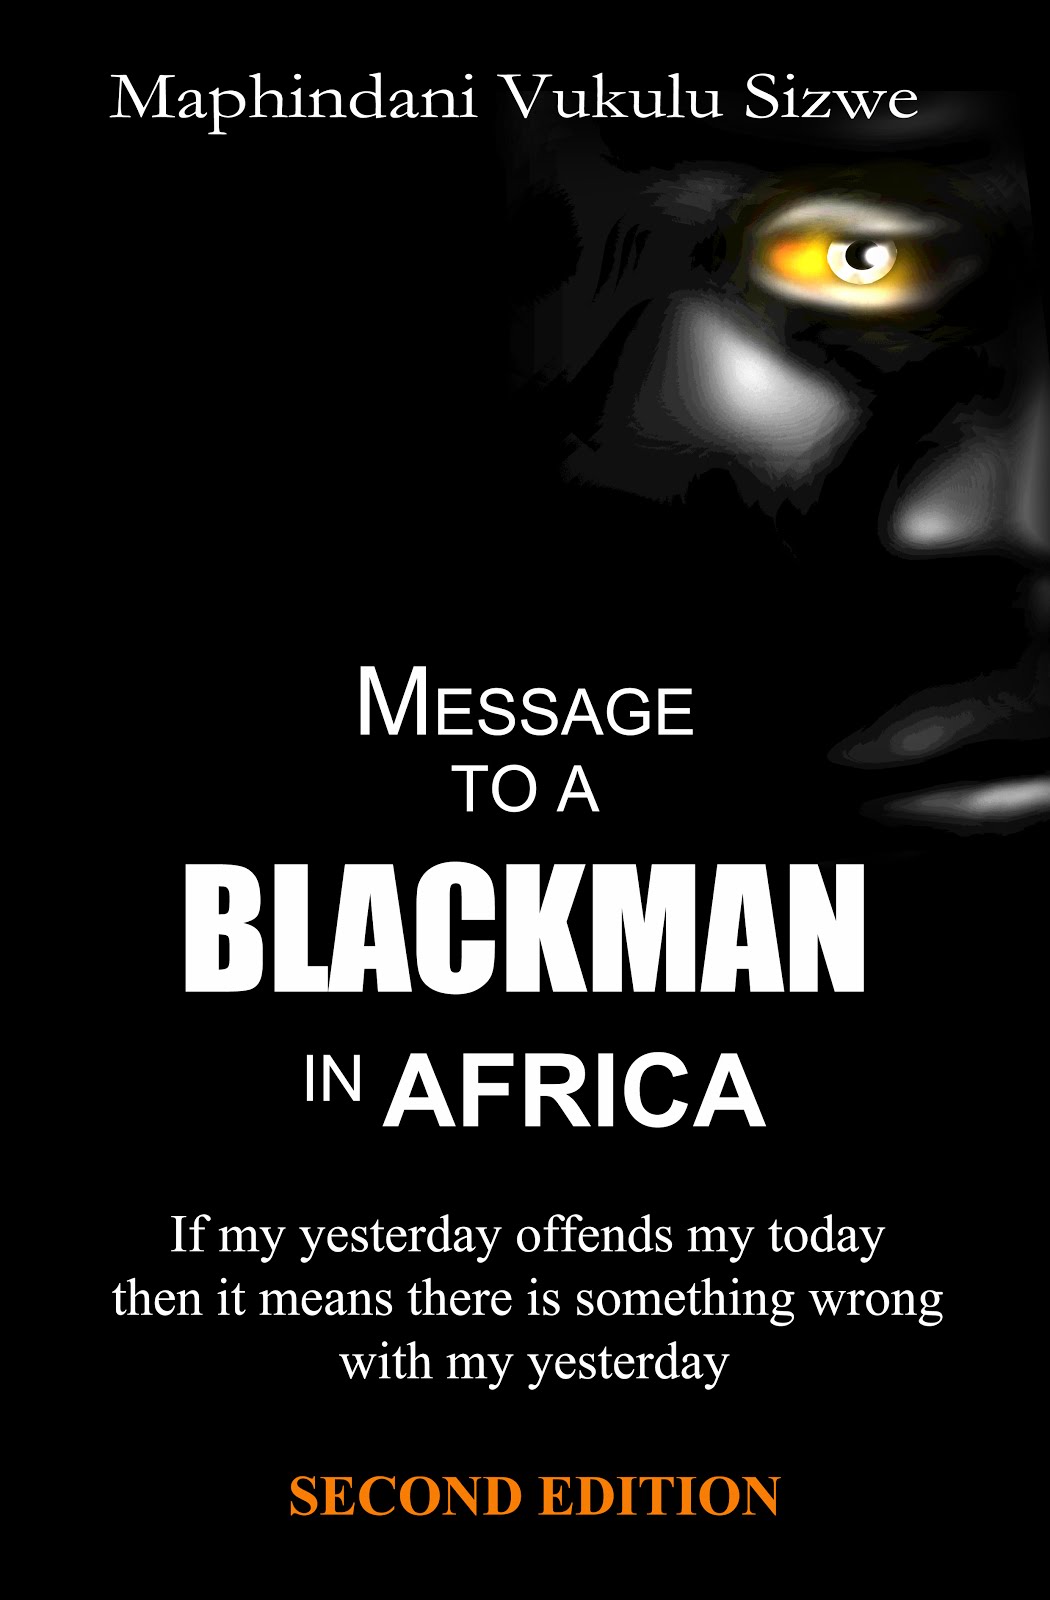 Message to a Blackman in Africa, 2nd edition coming soon